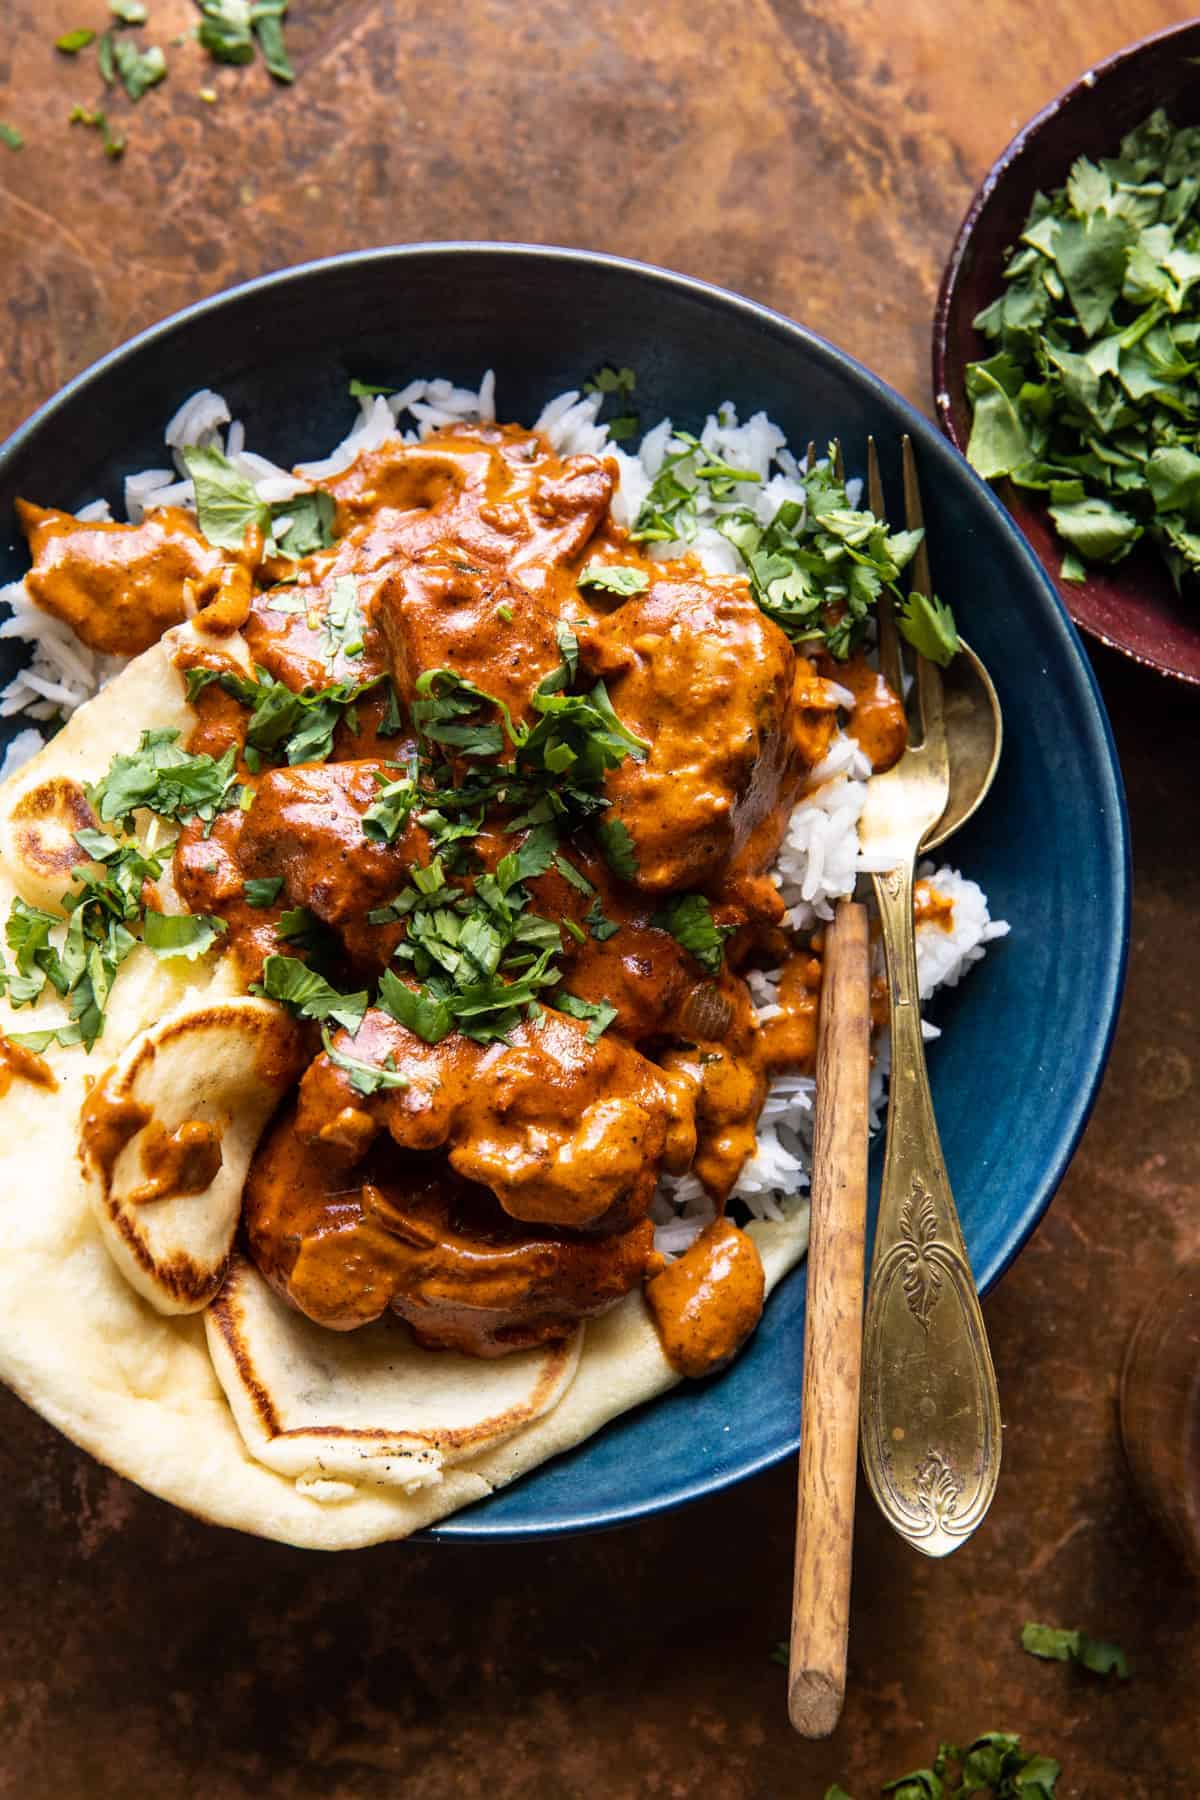 Easy Indian Dinner Recipes: Delicious and Nutritious Meals in Minutes